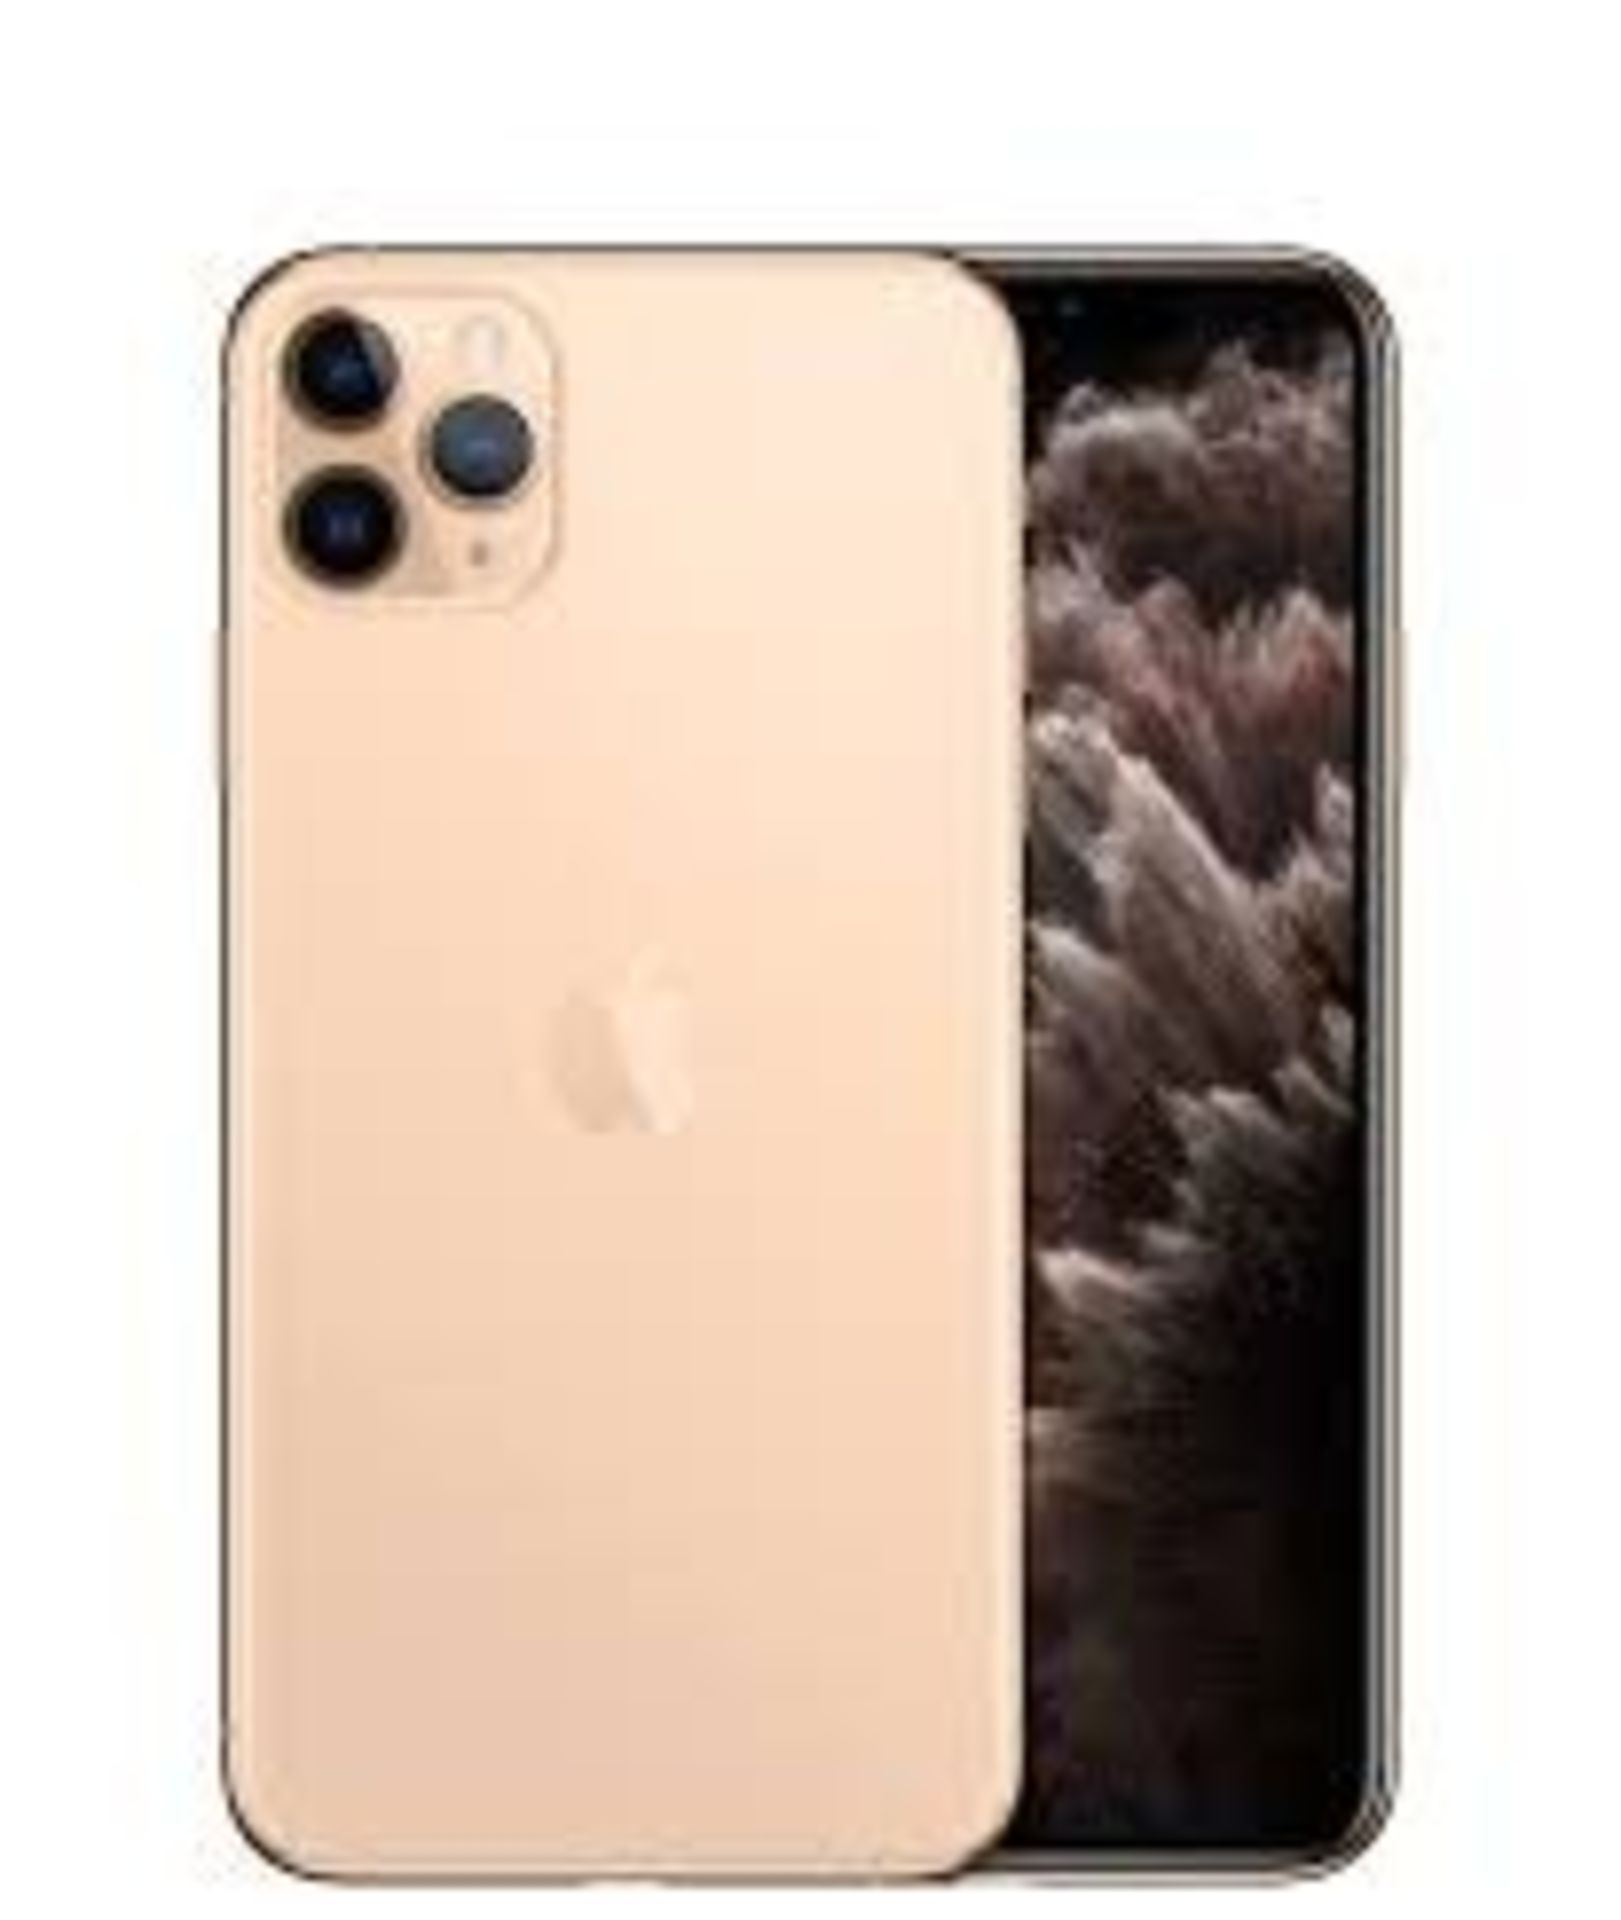 Apple iPhone 11 Pro Max 64GB Gold Grade A - Perfect Working Condition RRP £1149 (Fully refurbished